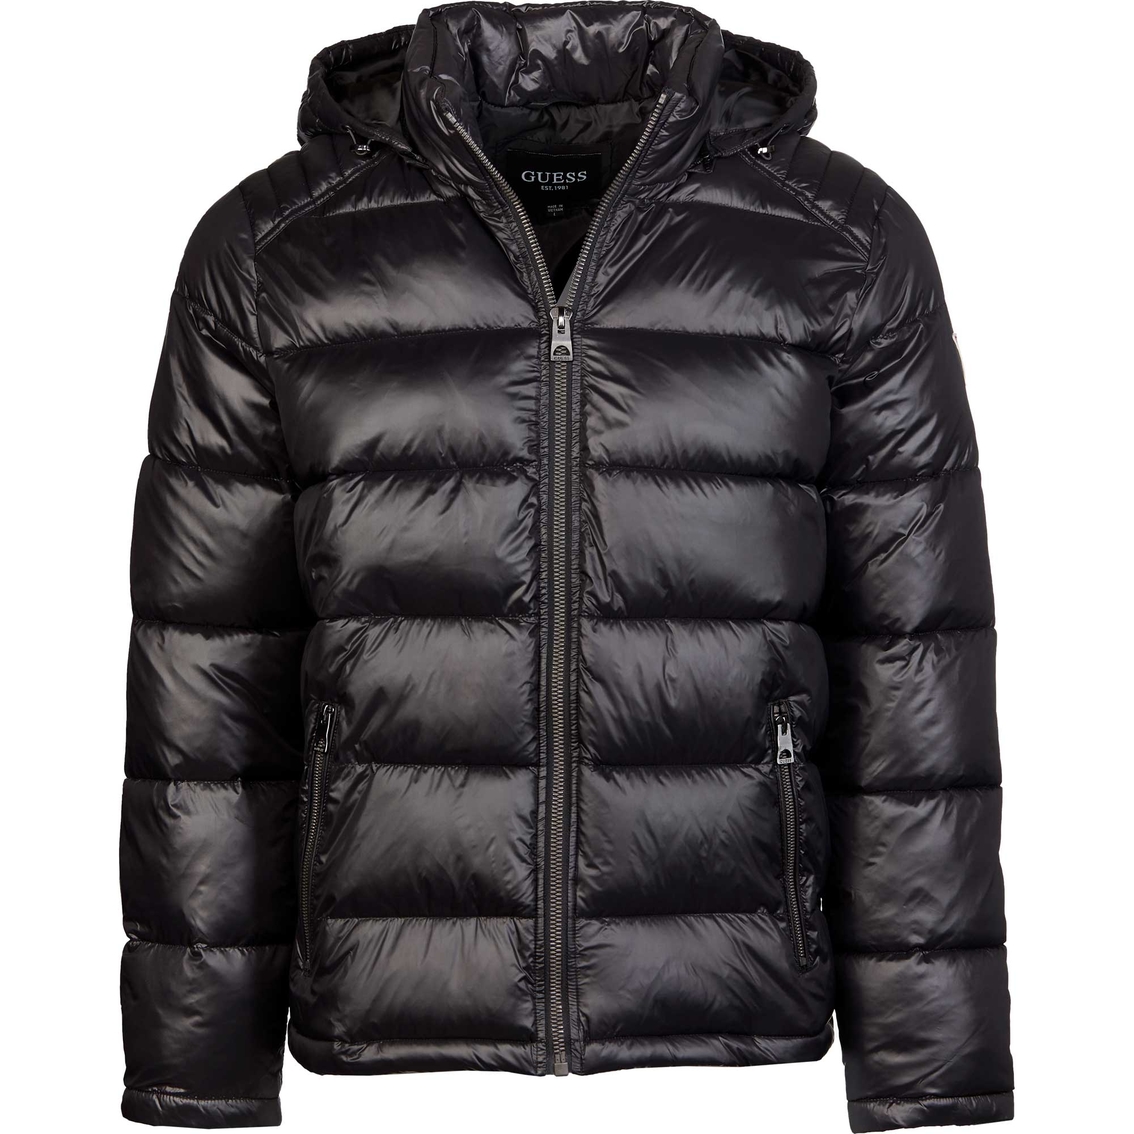 Guess Midweight Puffer Jacket | Coats & Jackets | Clothing ...